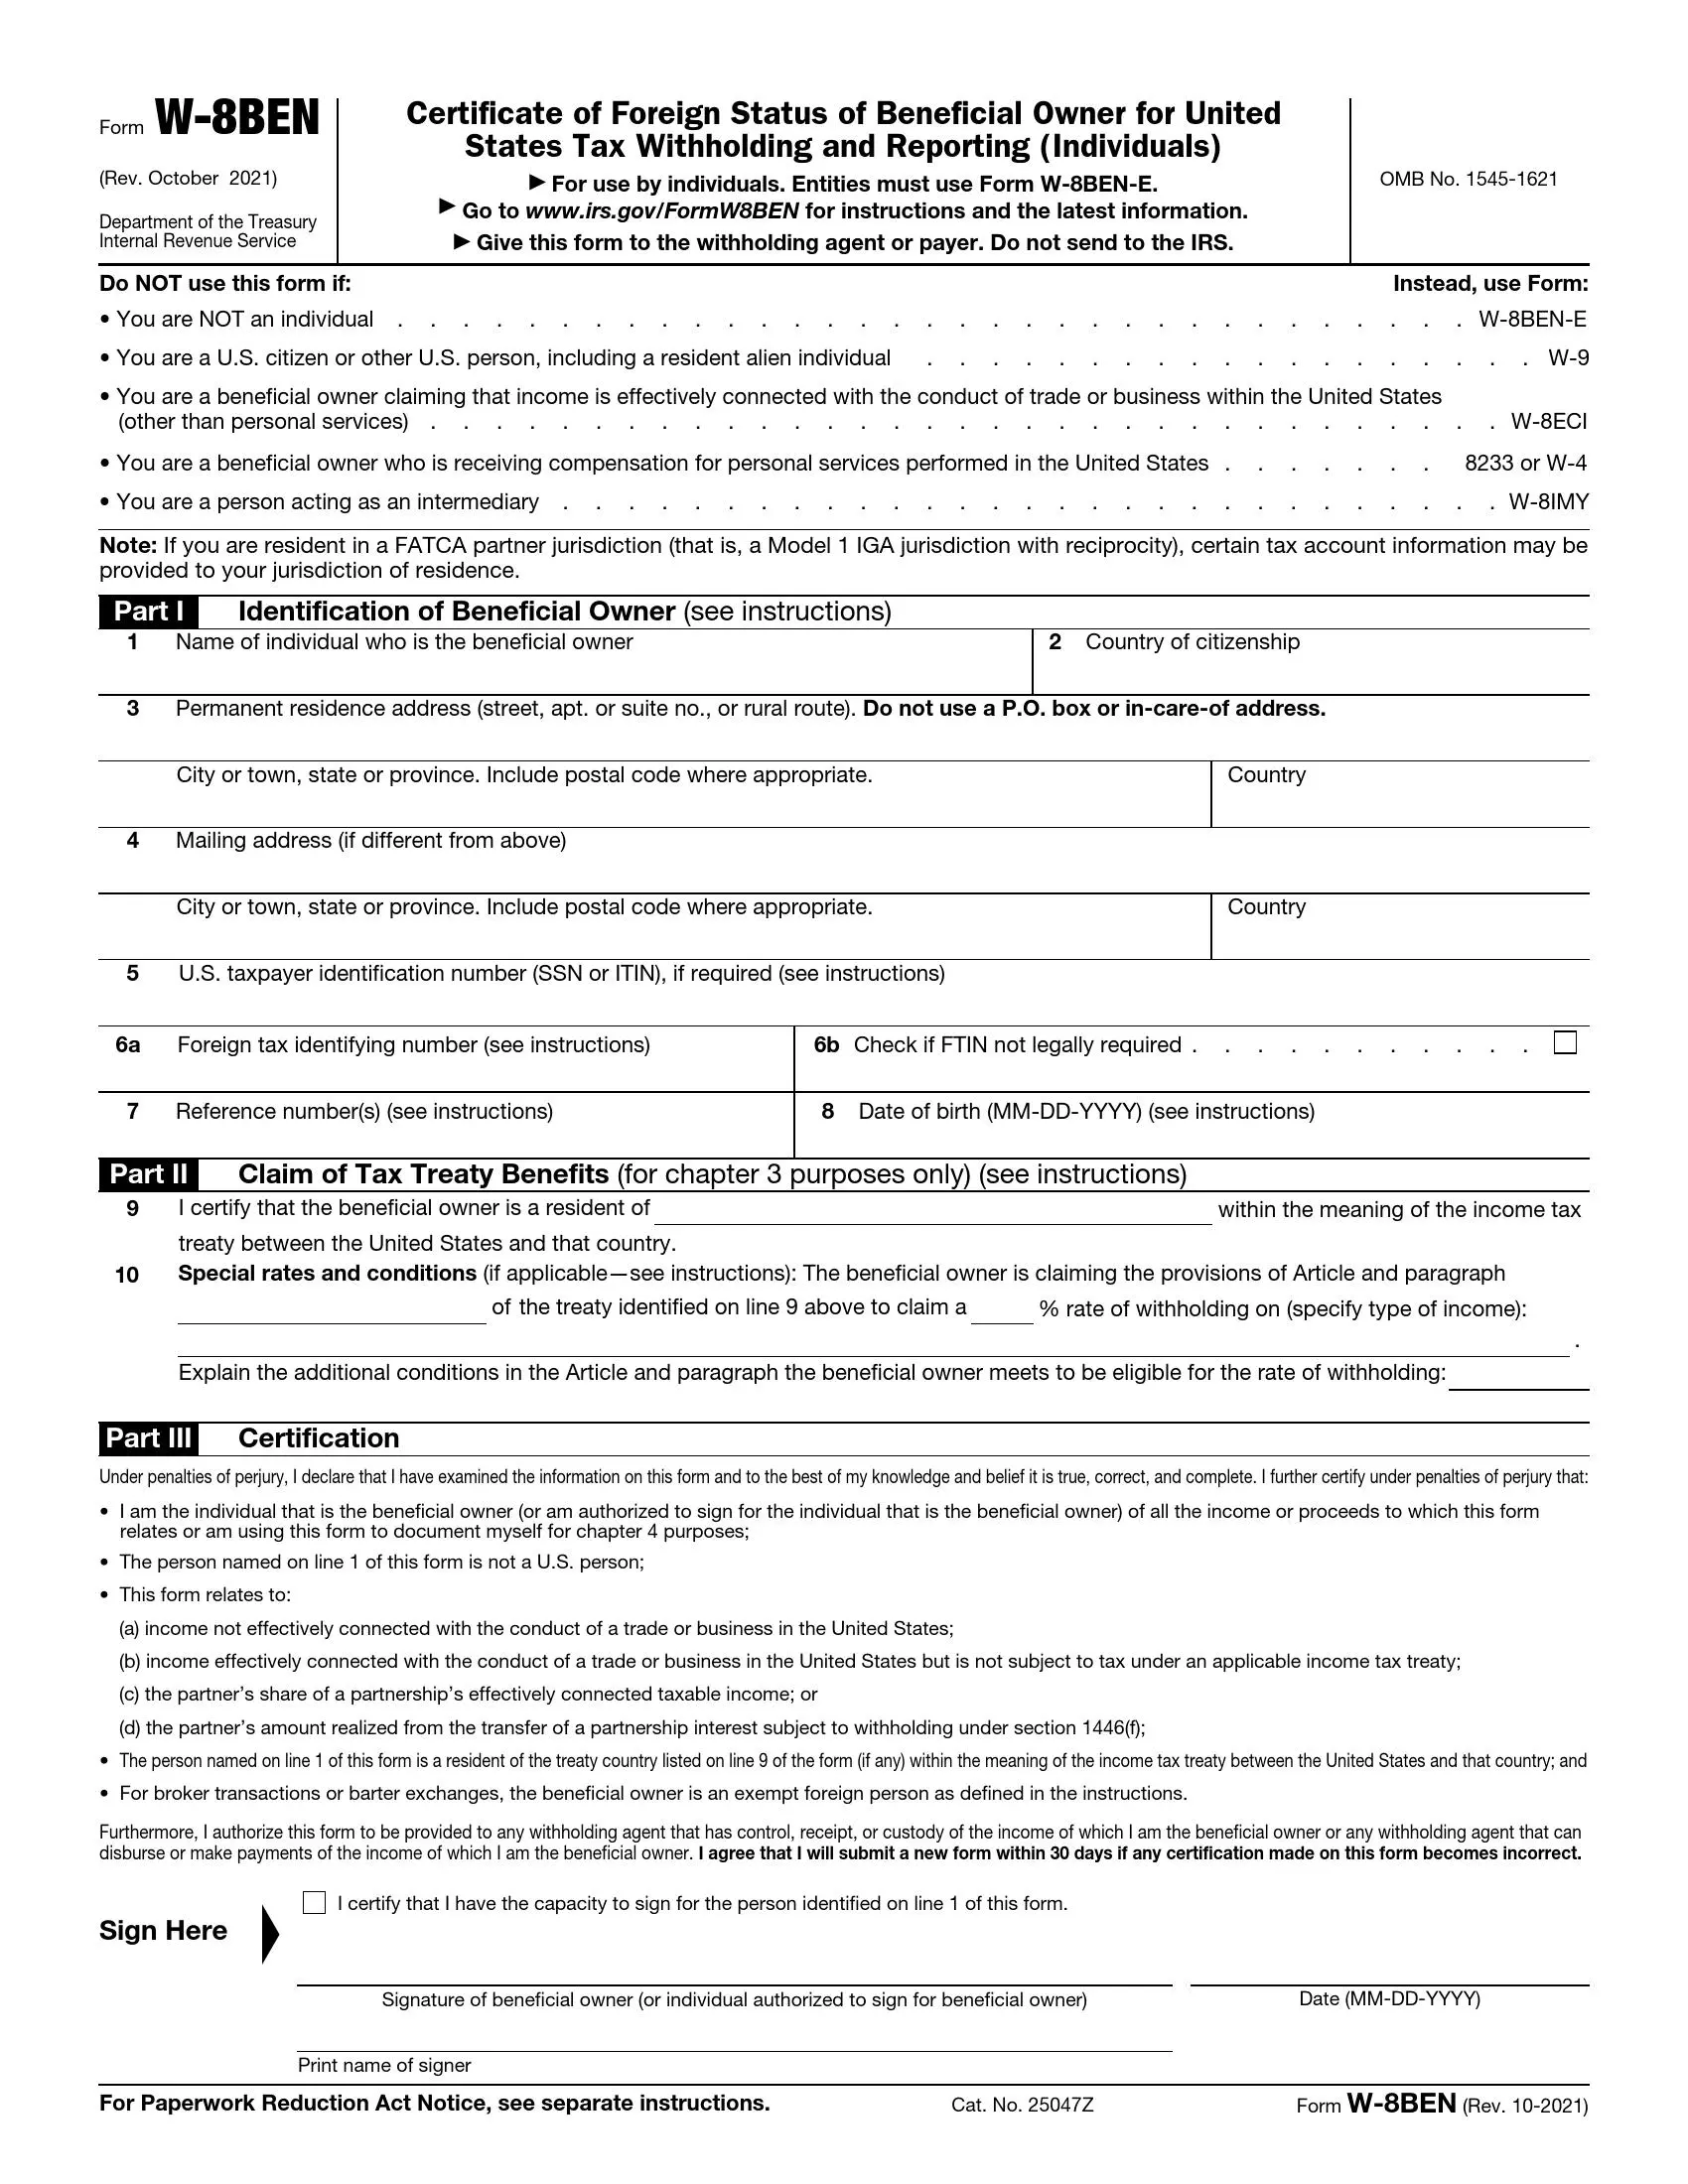 irs form w-8ben rev 10 2021 preview